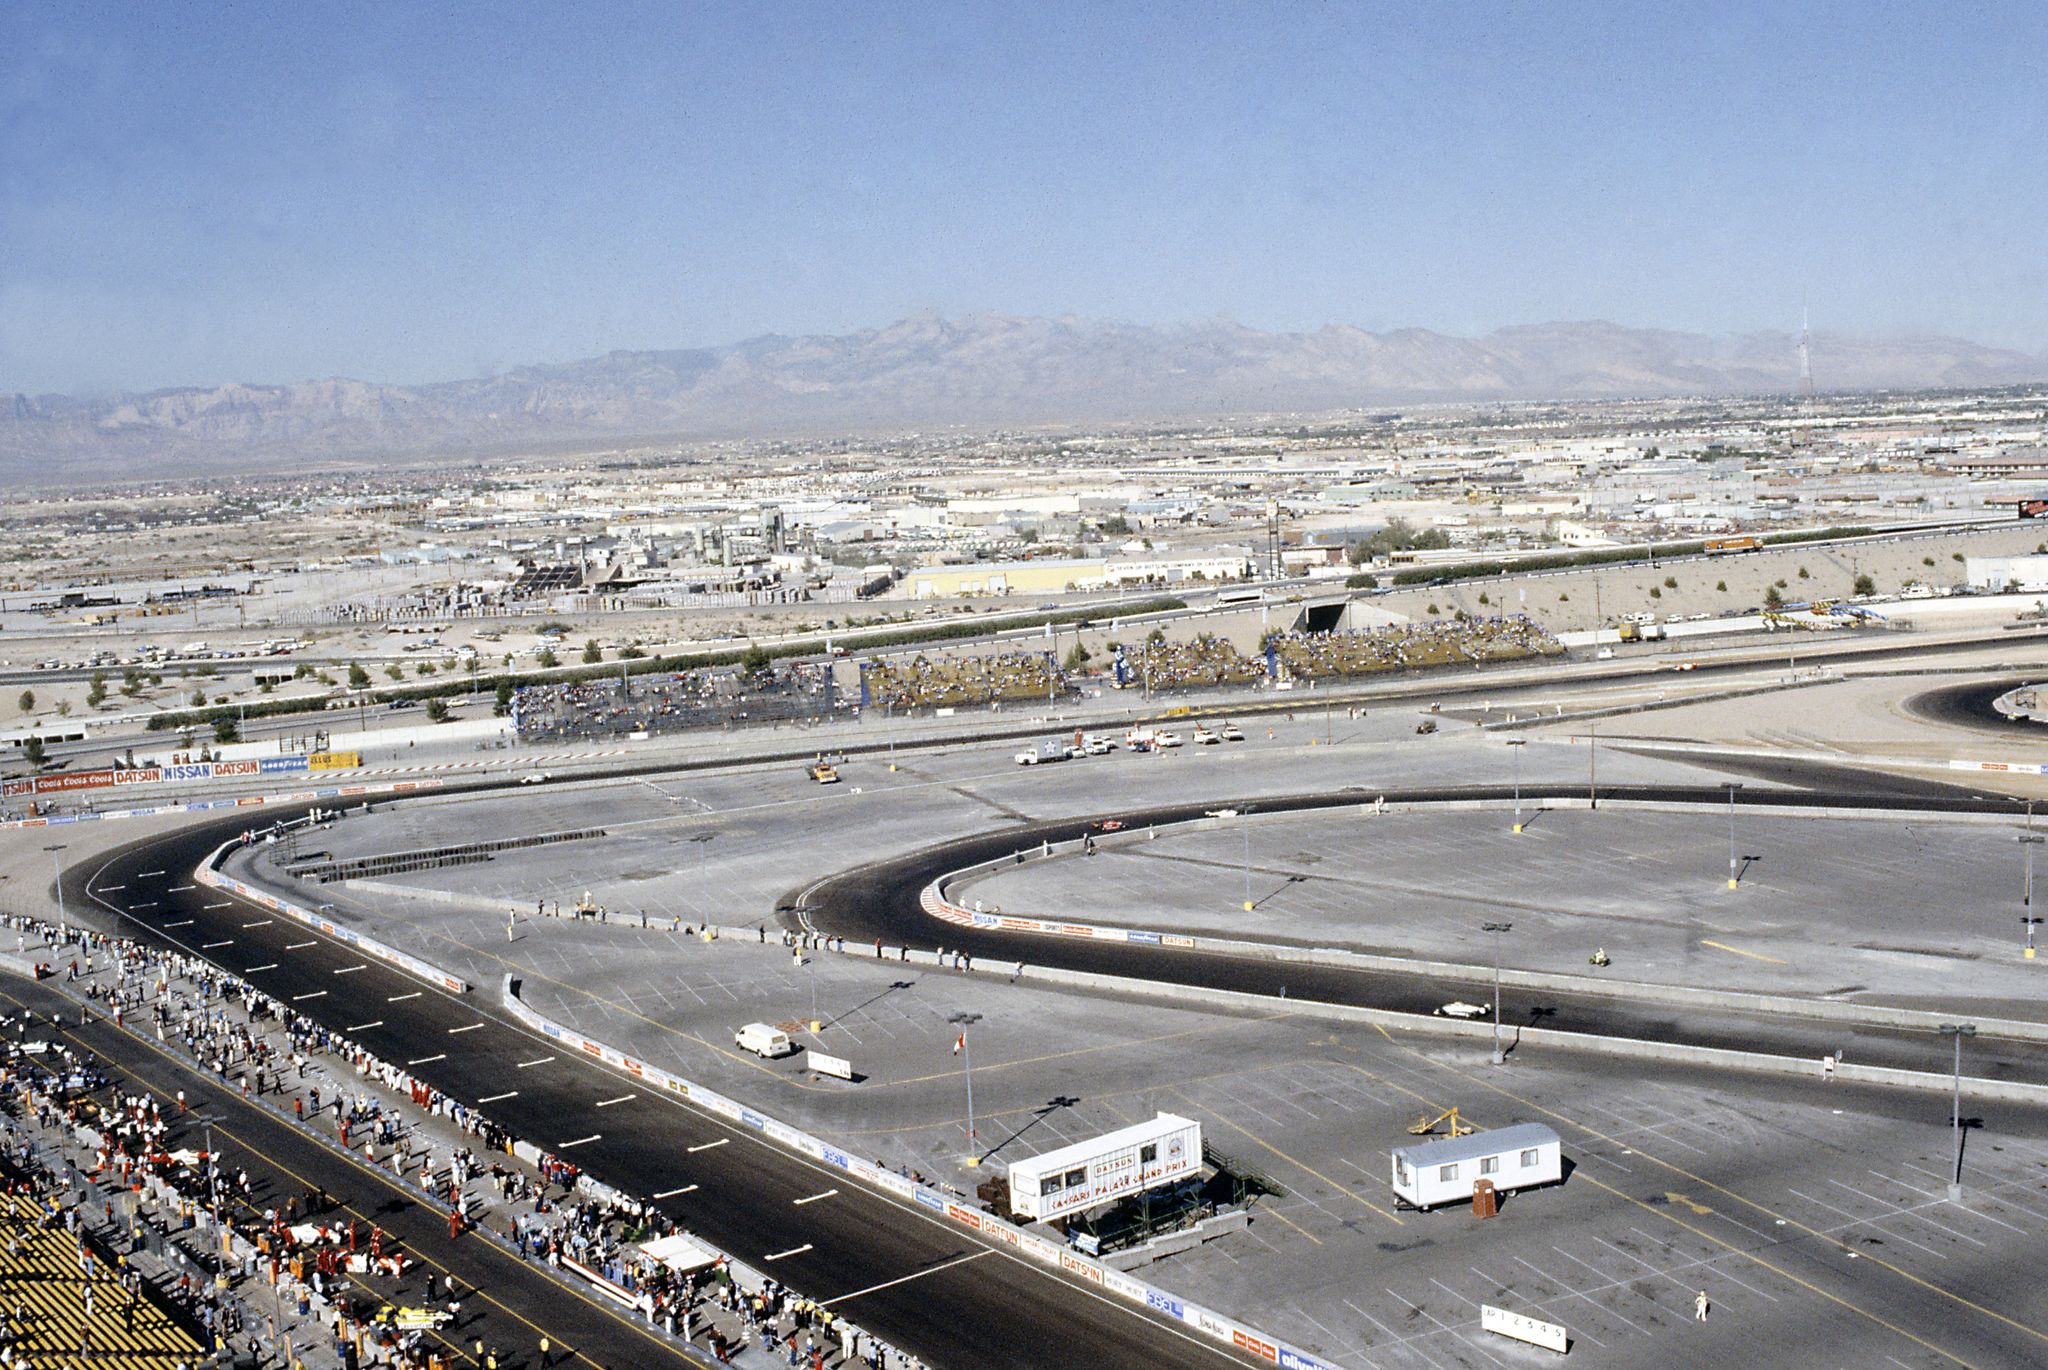 1981 las vegas grand prix caesars palace, las vegas, nevada, usa 15 17 october 1981 the temporary pits and circuit in the car park of the caesars palace hotel and casino world copyright lat photographic ref 35mm transparency 81lv20